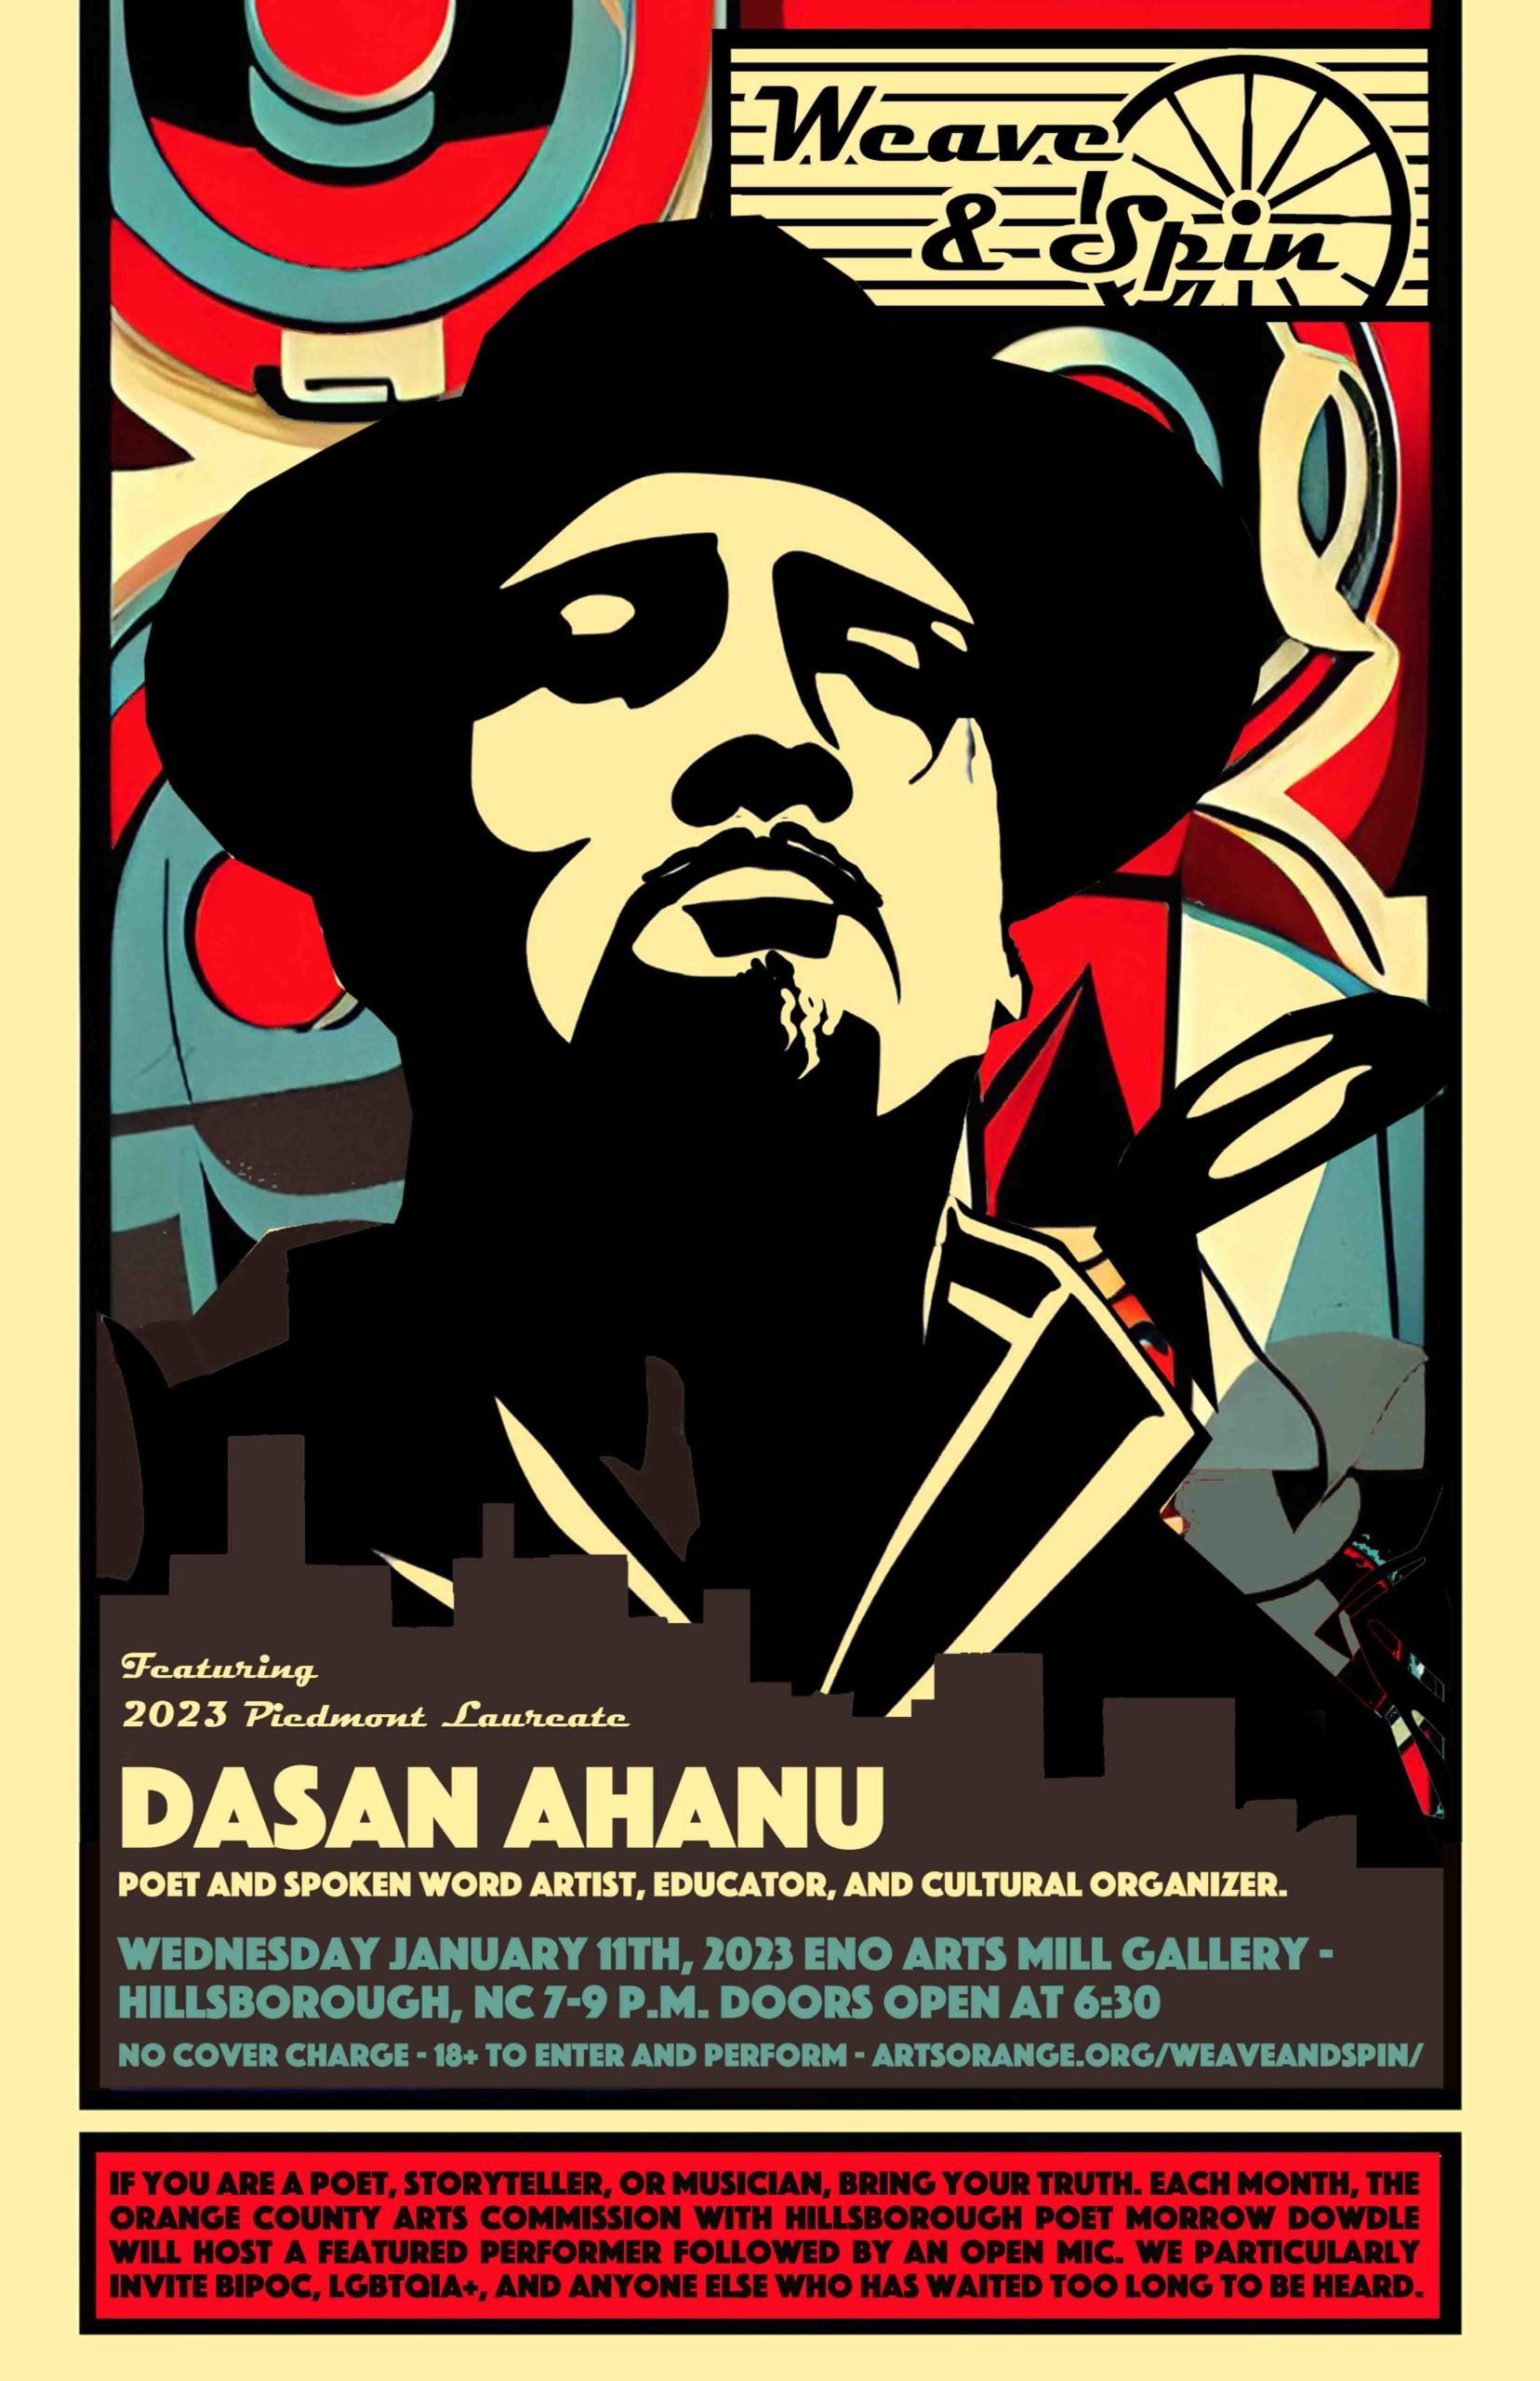 weave and spin poster featuring dasan ahanu